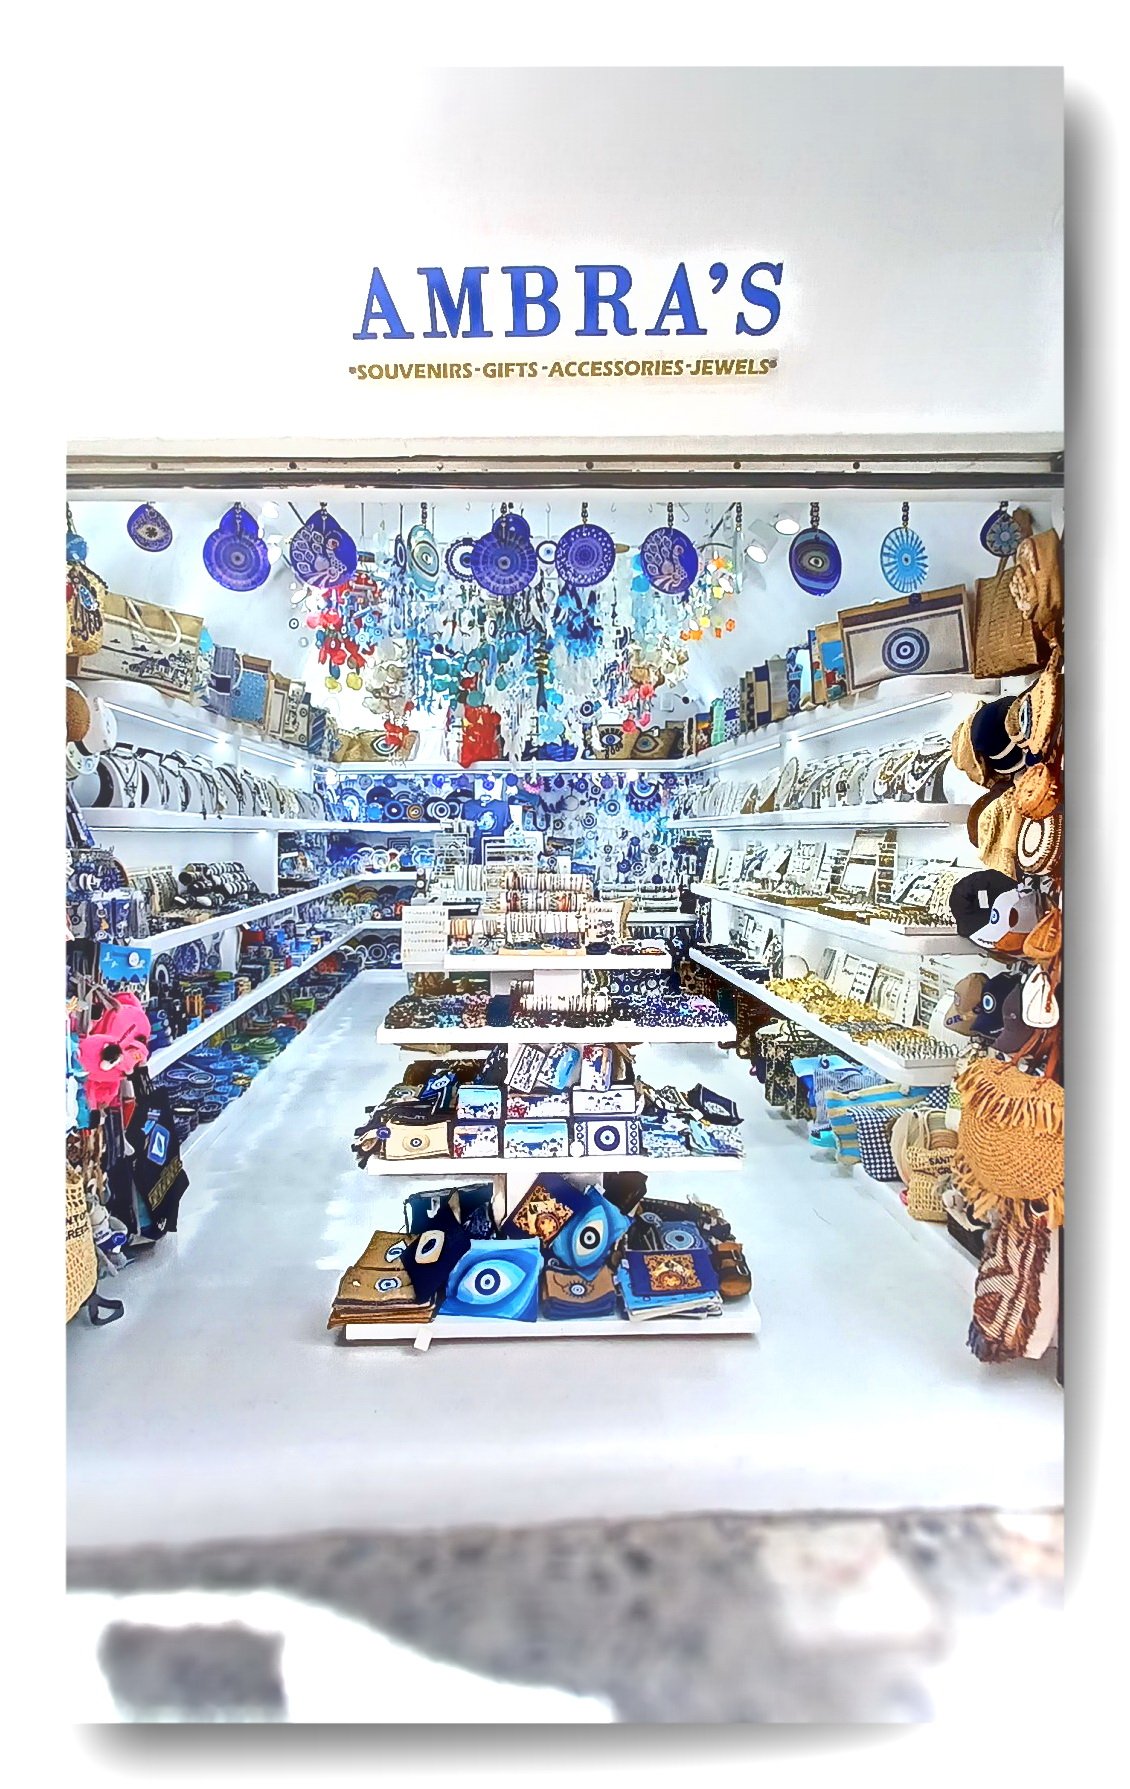 AMBRA'S Store with SOUVENIR and GIFTS in Fira Santorini island in Greece